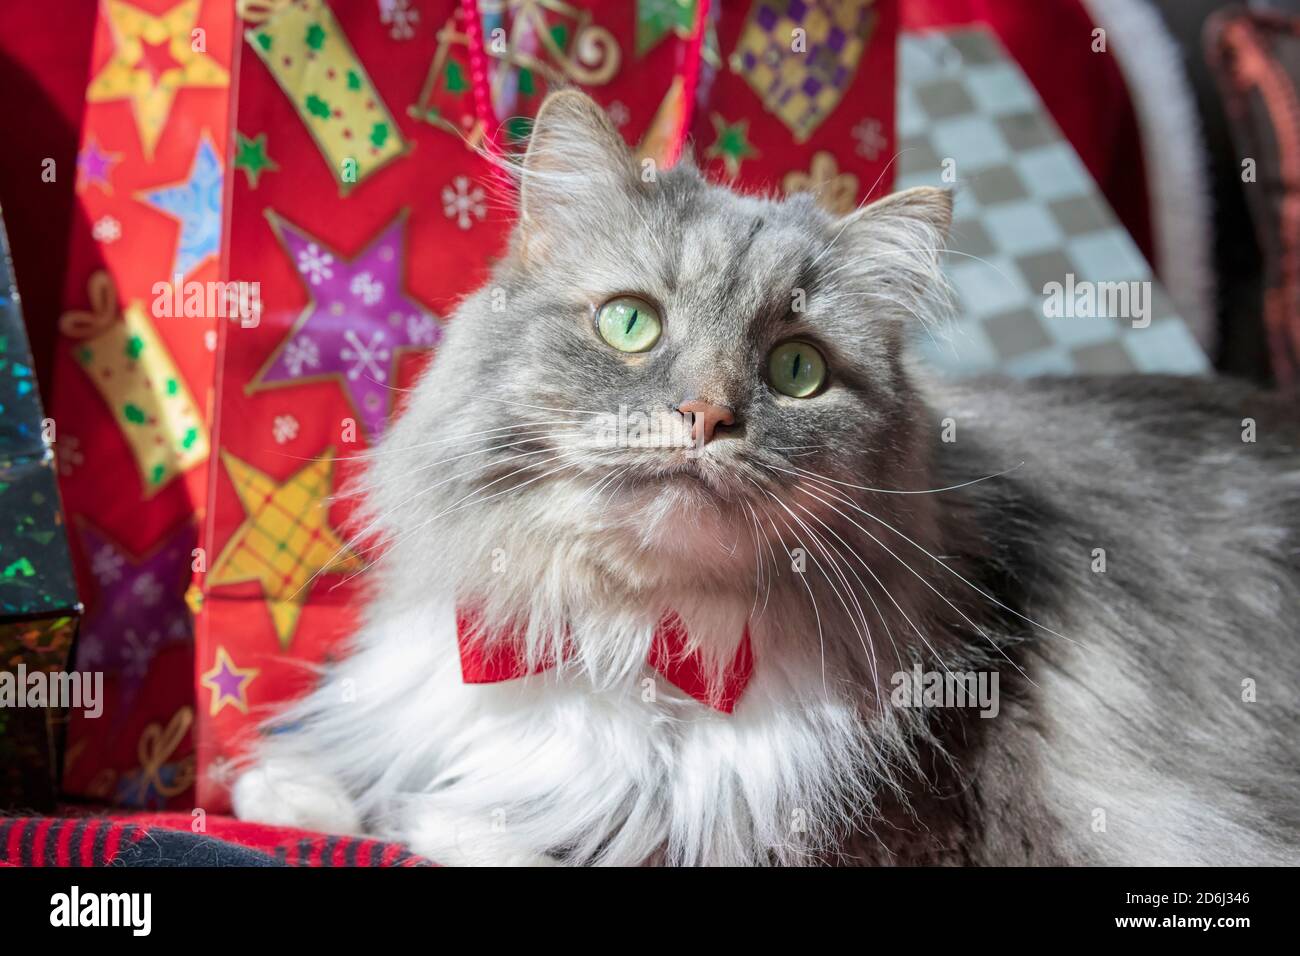 A long haired grey tabby cat with a Christmas theme.  Siberian Forest cat with green eyes and a white mane wearing a red bow tie. Stock Photo